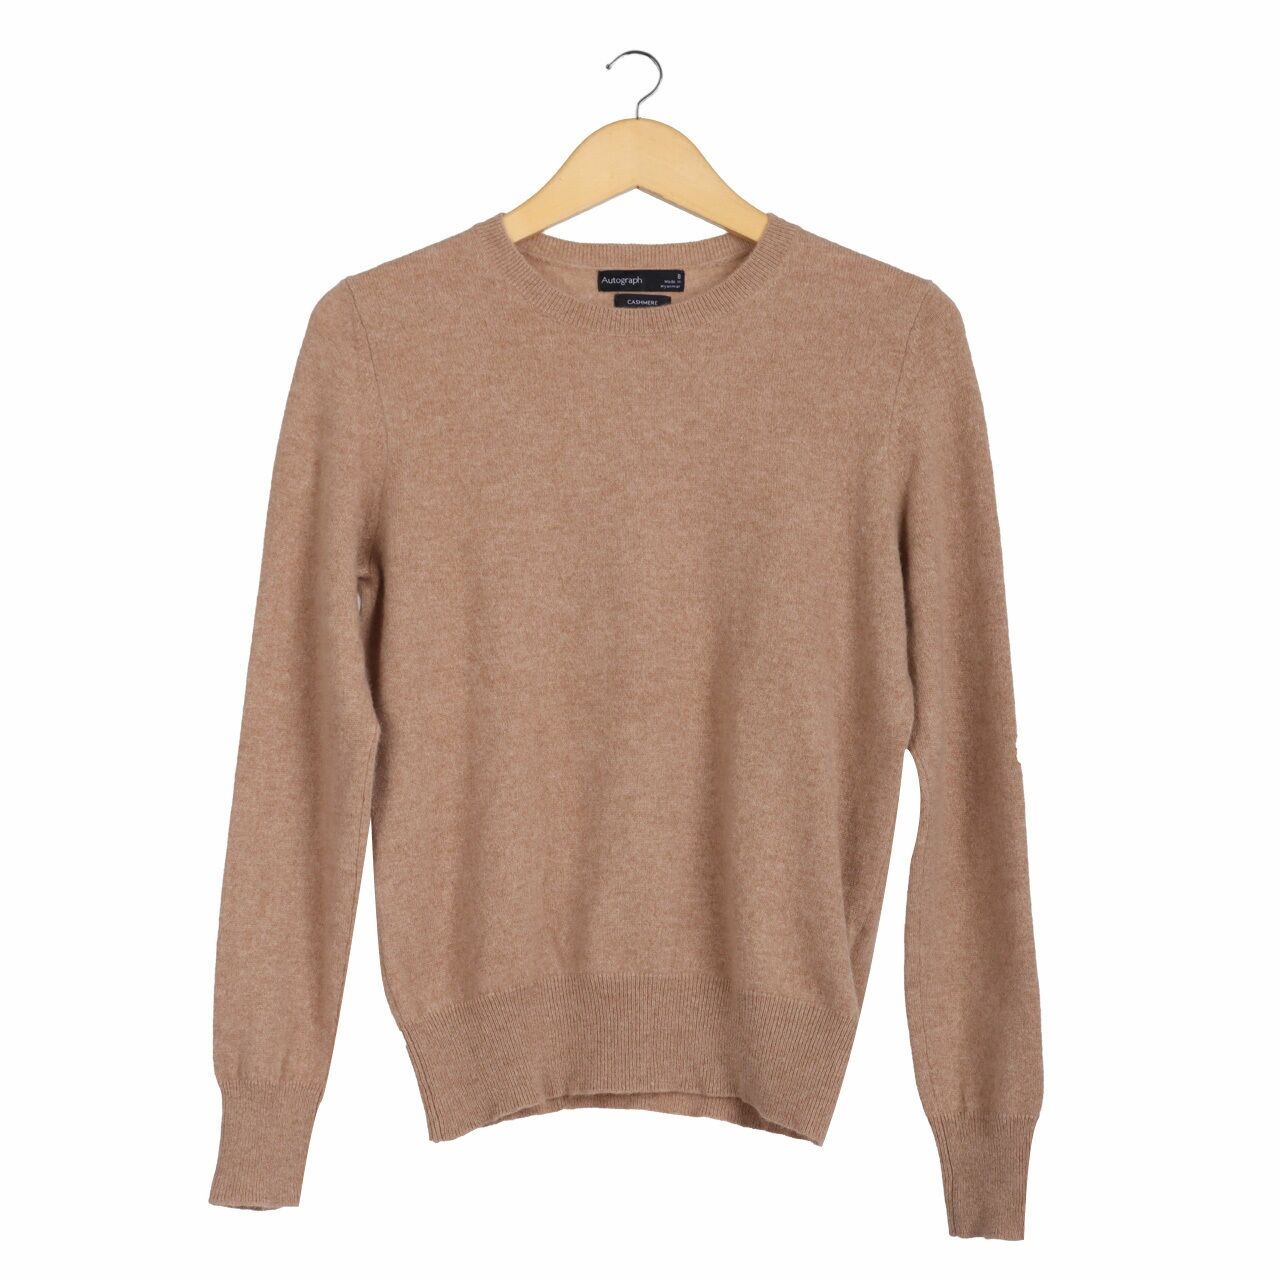 Autograph (Marks n Spencer) Camel Knit Sweater